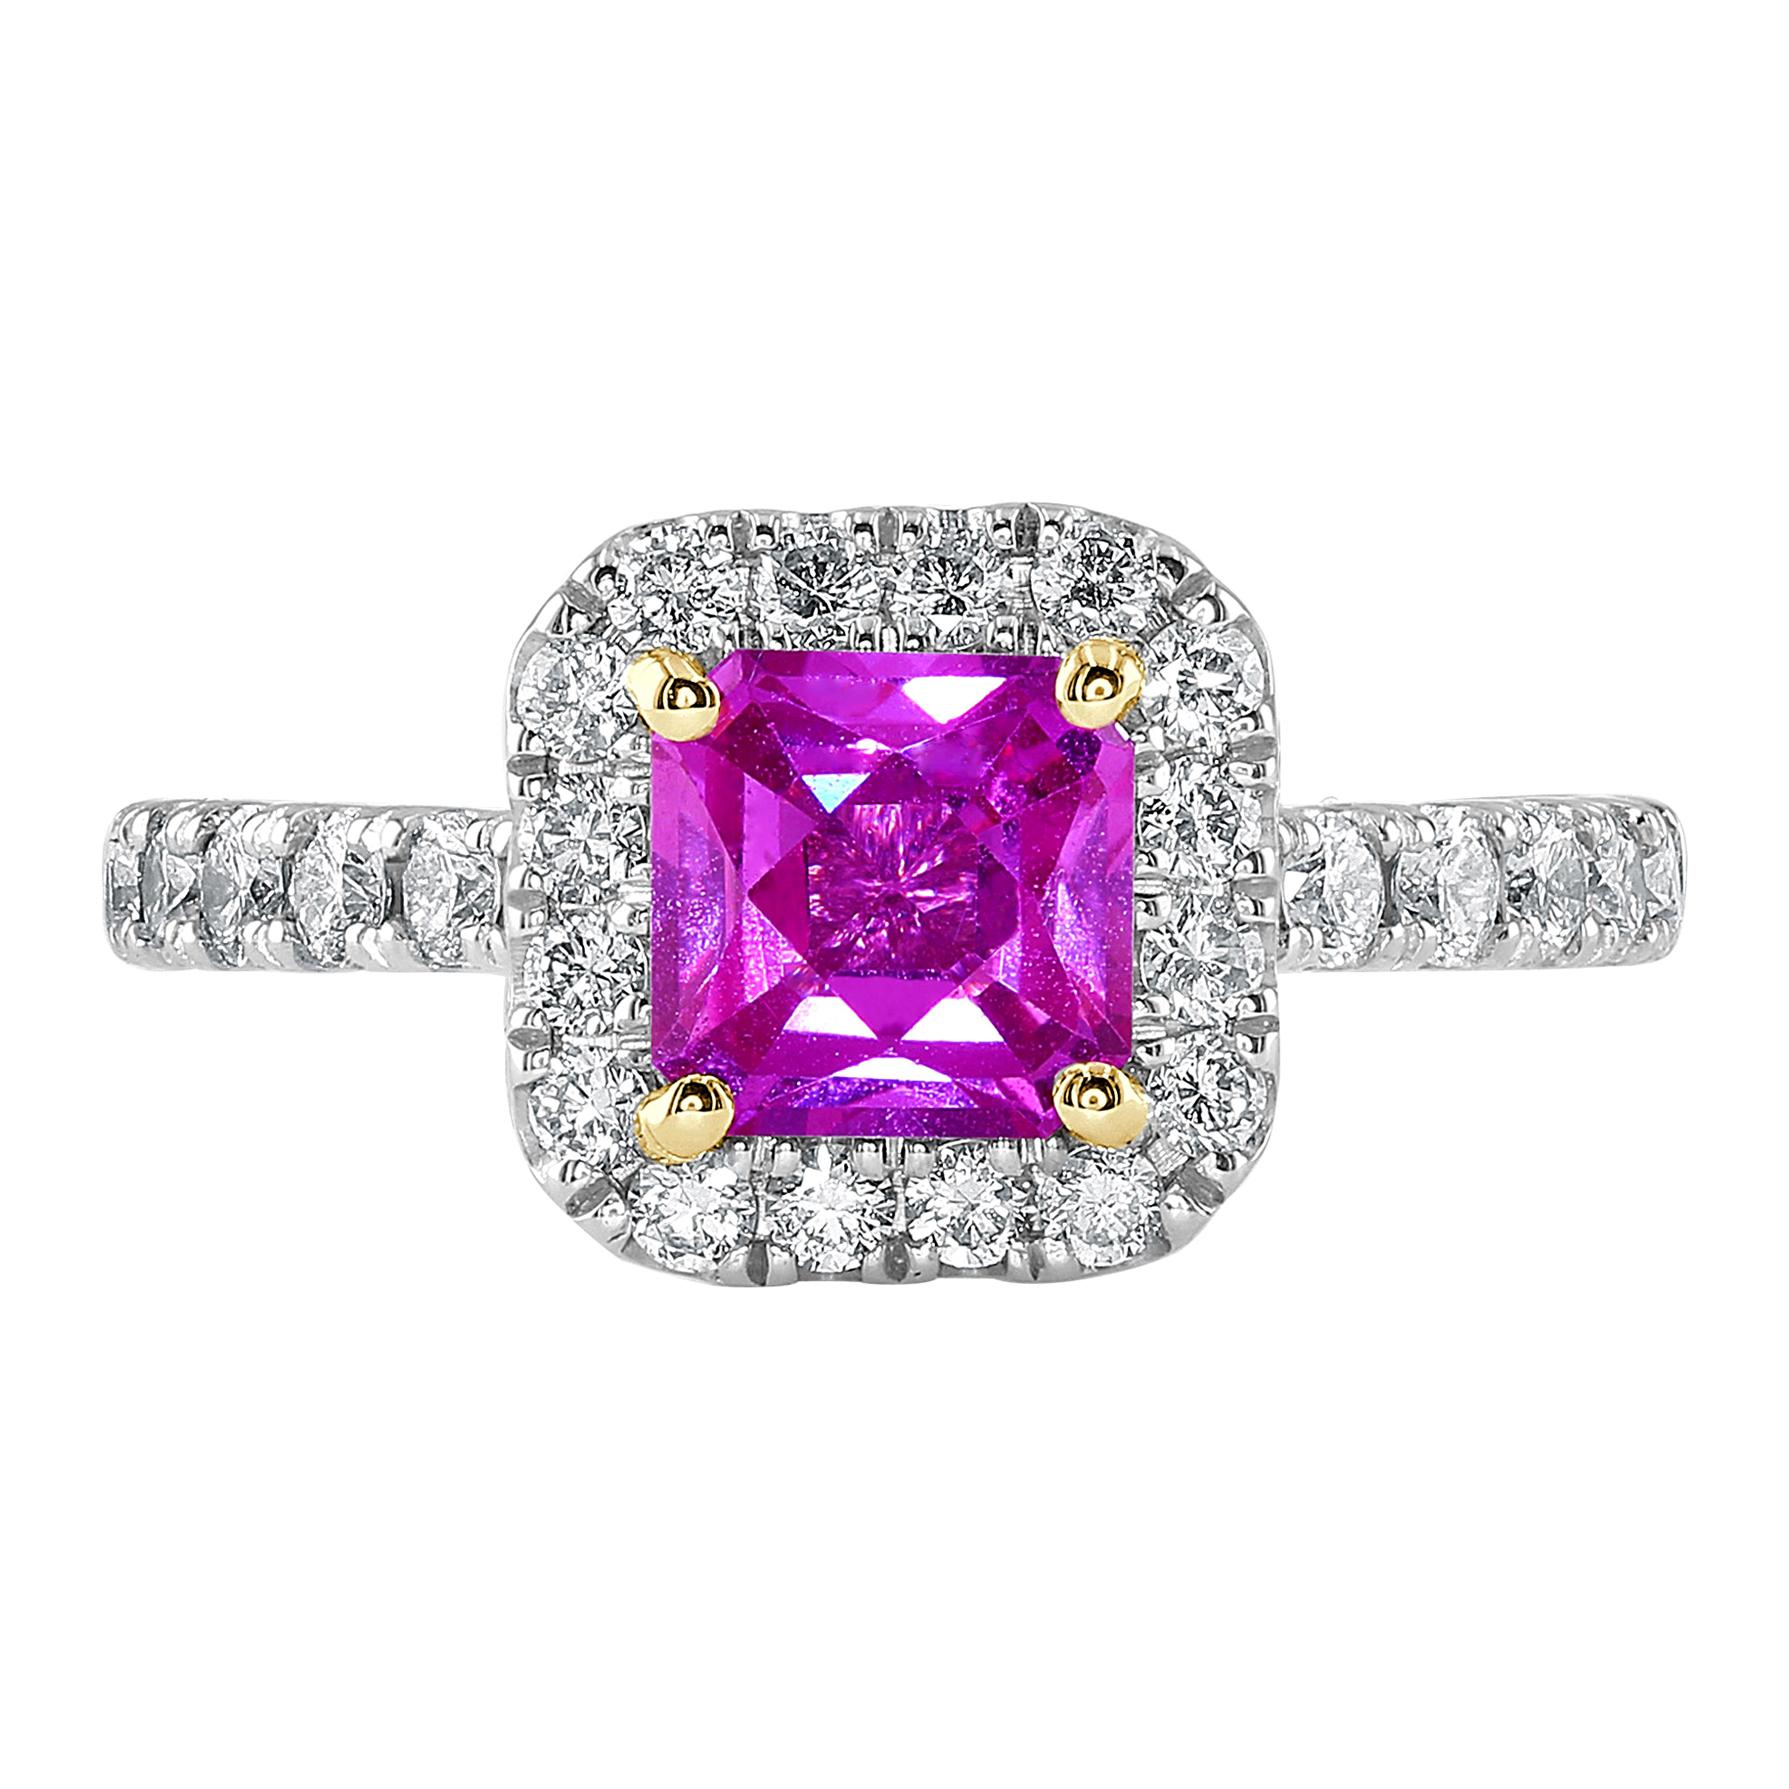 1.23 Carat Pink Sapphire and Diamond Cocktail Ring Set in 18 Karat For Sale